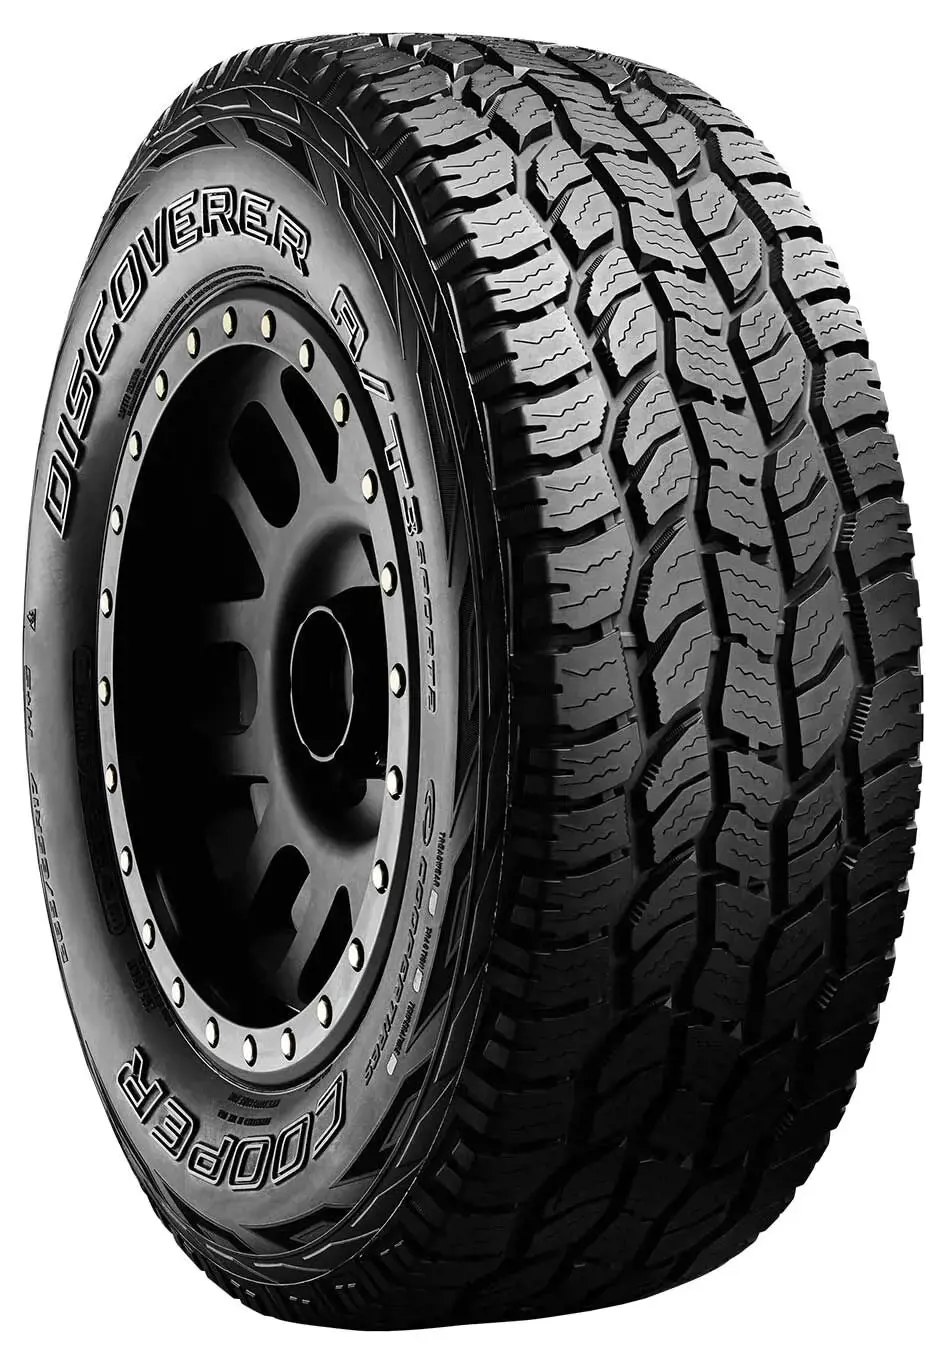 Cooper 245 70 R16 111T Discoverer AT3 Sport 2 XL OWL MS 15329954